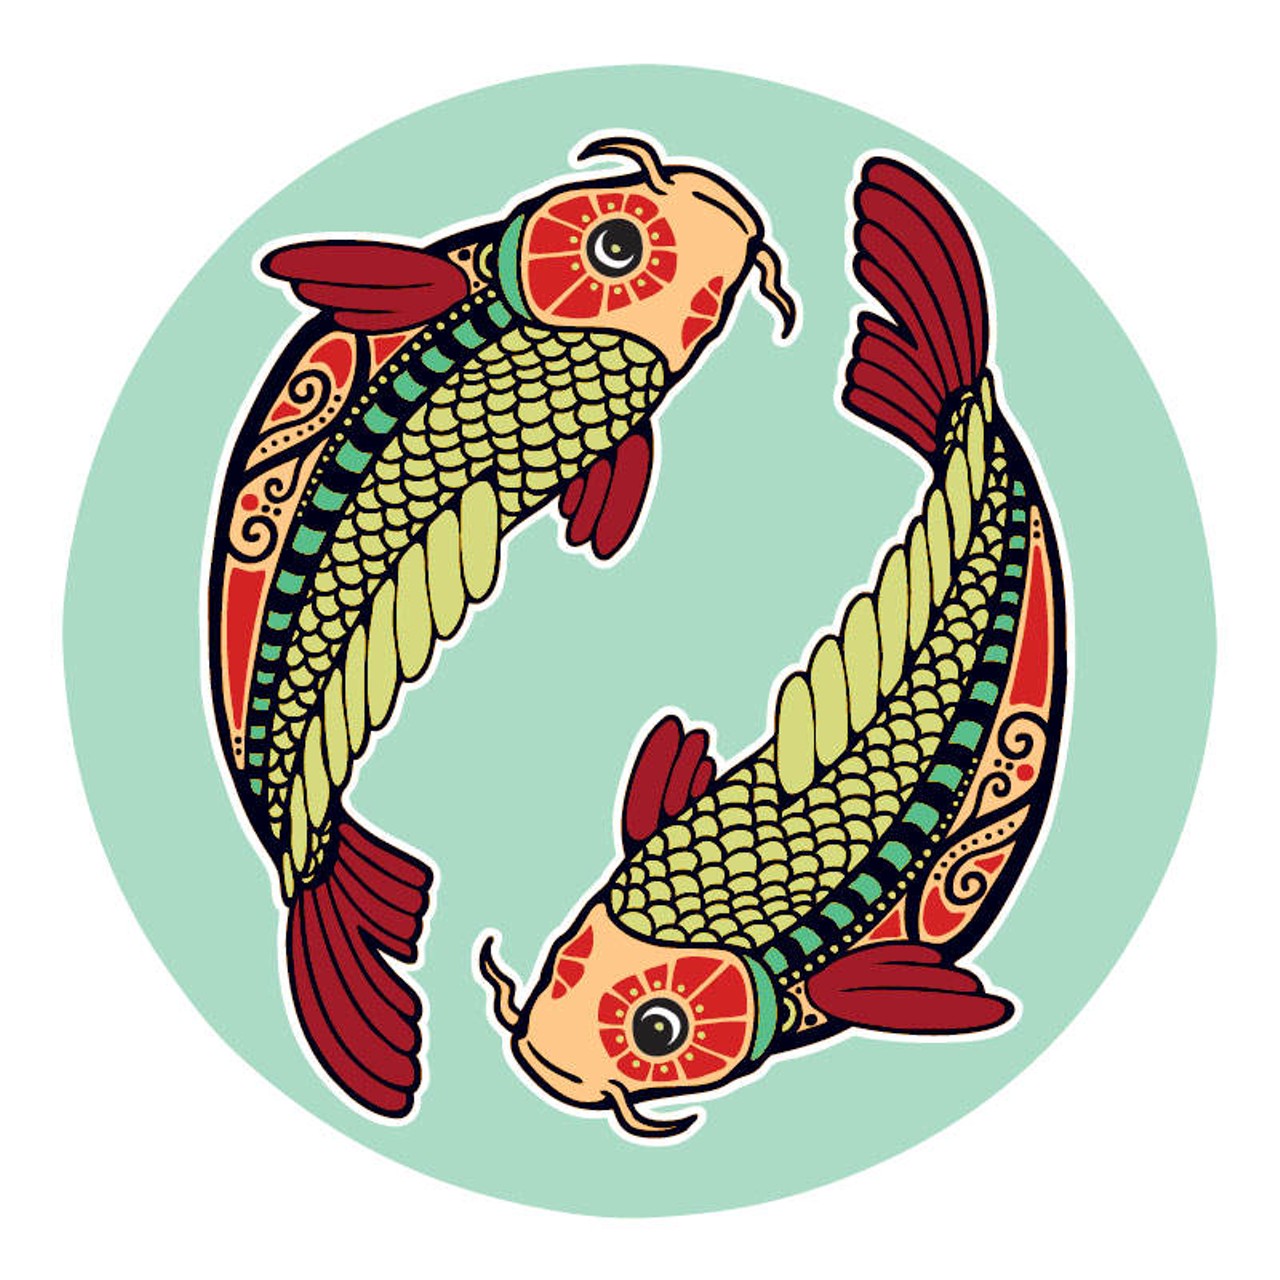 PISCES (Feb. 21-March 20): 
Finally getting to the bottom of your &#147;stuff&#148; is where it&#146;s at right now. This is a theme that has rebirth written all over it. As you work through issues that have haunted you all of your life, the bigger part of you is getting clearer by the day. At the same time, the fact that &#147;who you think you are&#148; is being newly introduced to your next incarnation, is making it feel a little tenuous and strange. Be patient. Ease into these revelations with the idea that your truer purpose is being seeded by the openings that occur, within you and without you, by the time the seasons change.